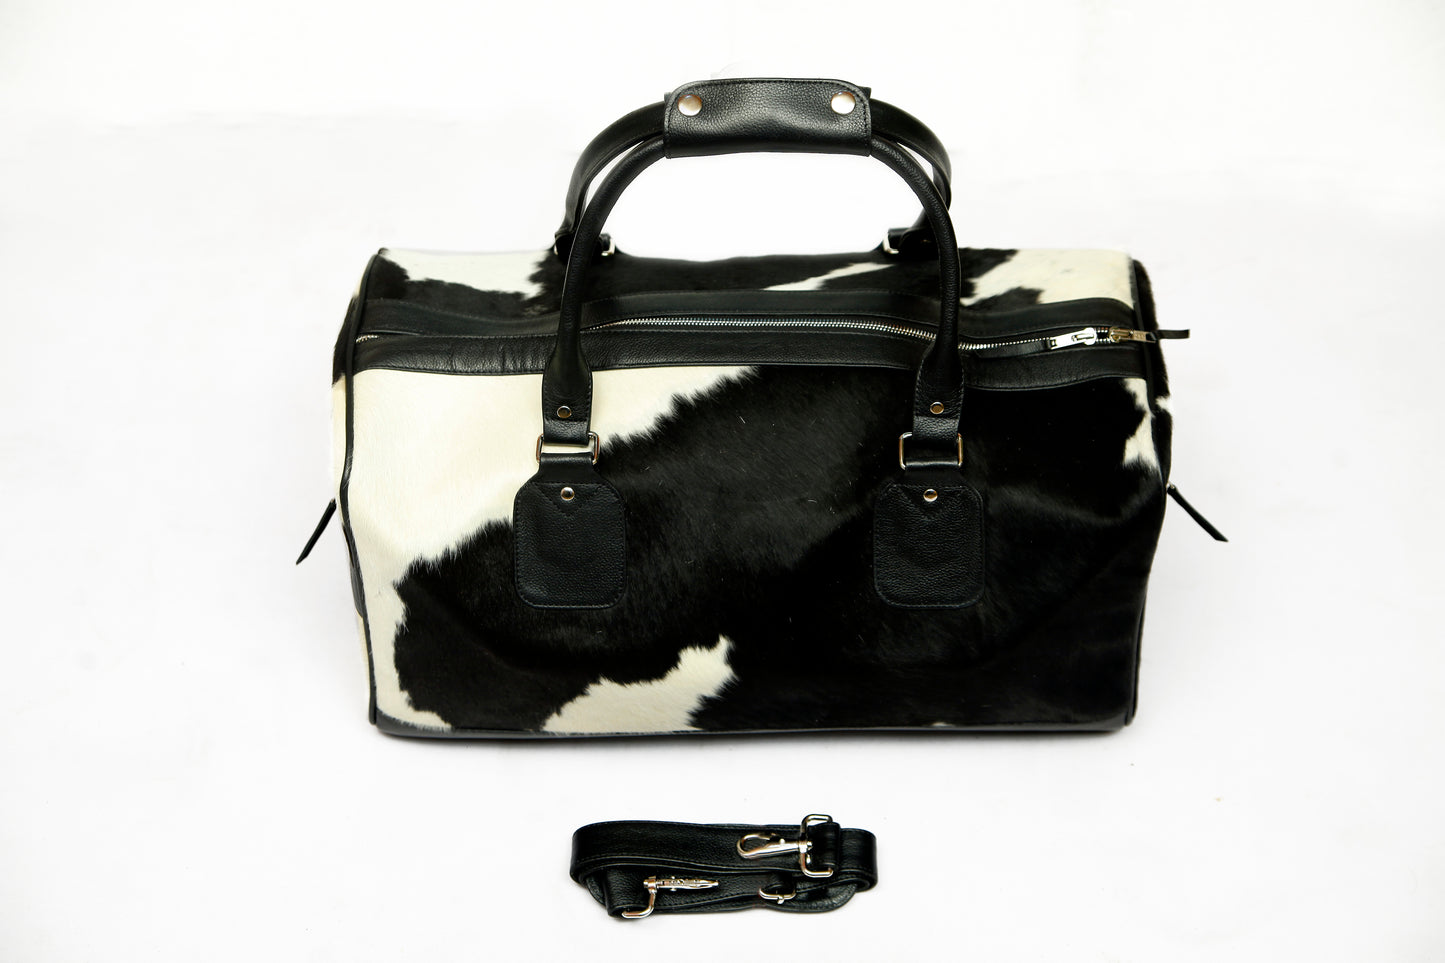 Genuine Cow Leather Duffel Travel Bag with Natural Hair on